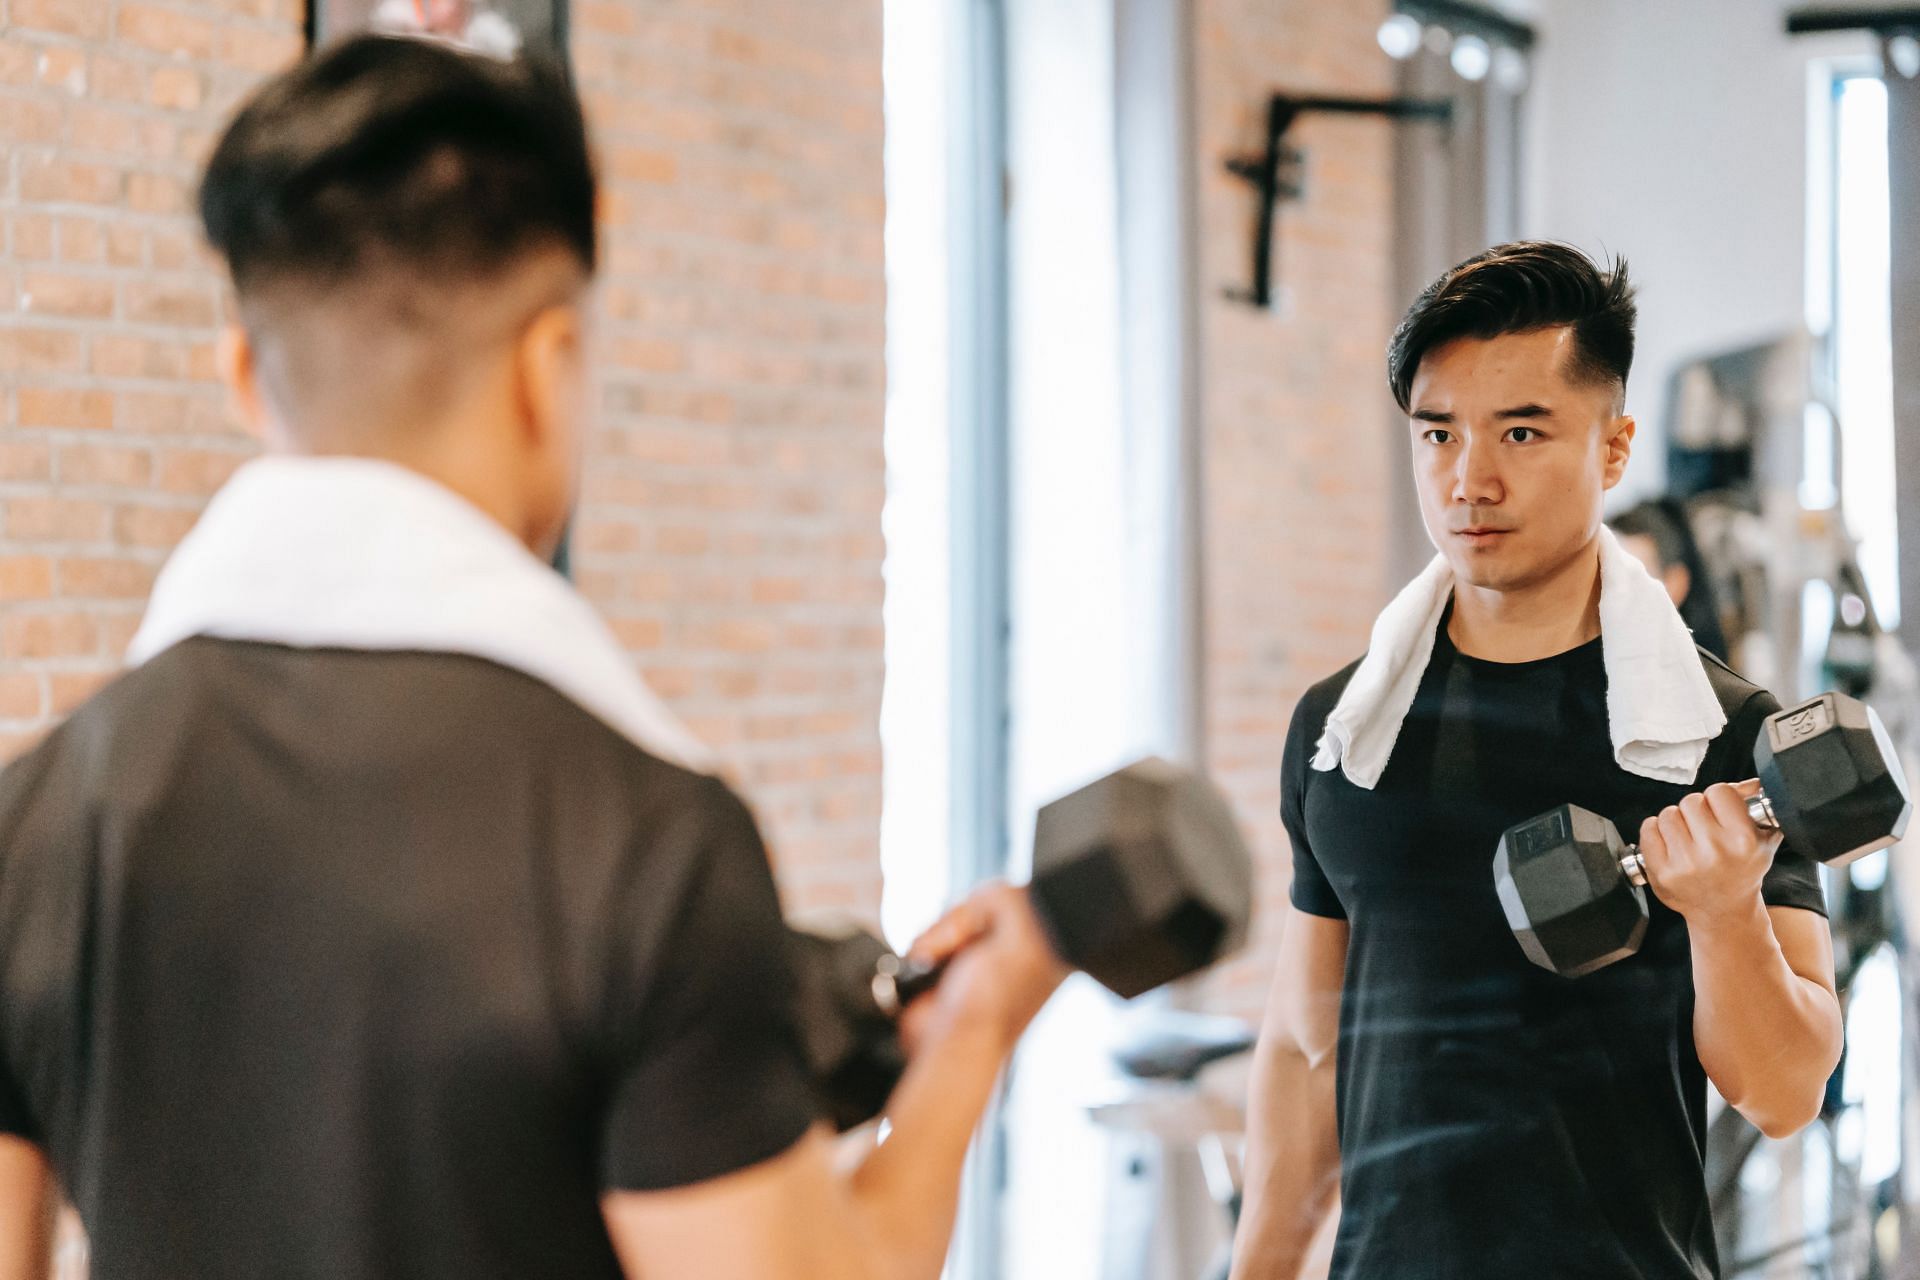 Workout mirrors also provides with variety of classes (Image via Pexels/Andres Ayrton)